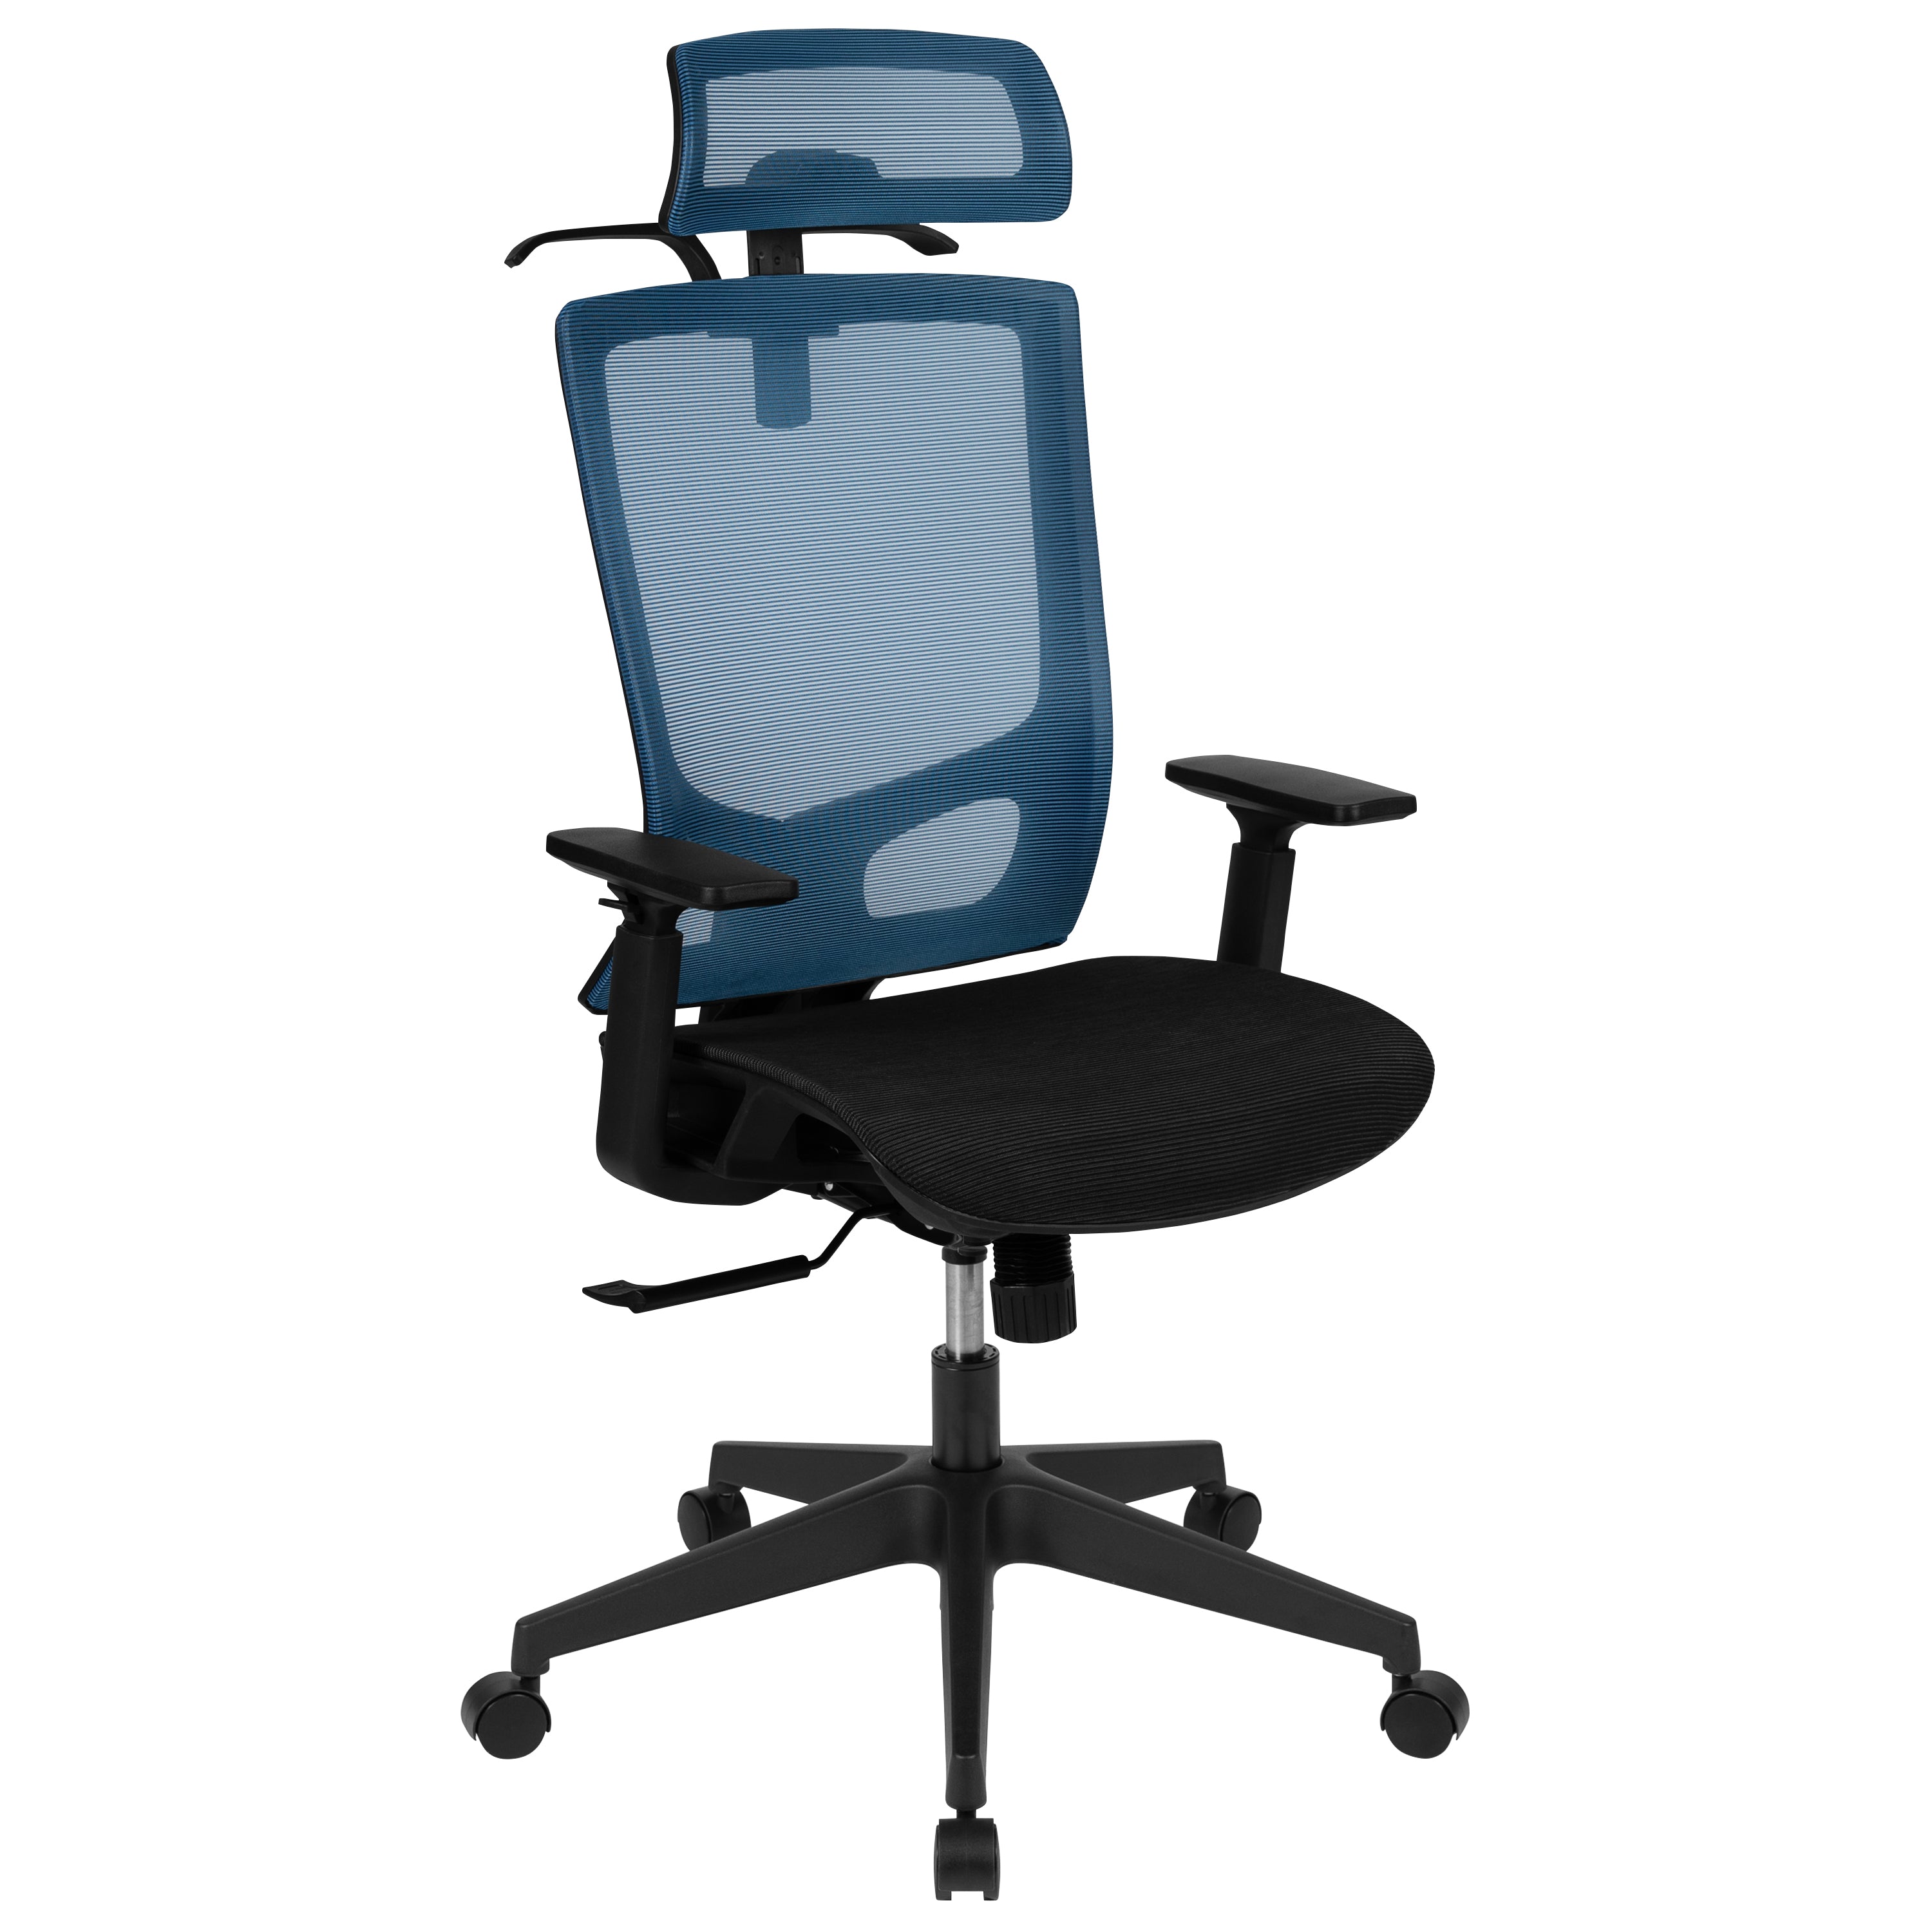 Ergonomic Mesh Office Chair with Synchro-Tilt, Pivot Adjustable Headrest, Lumbar Support, Coat Hanger and Adjustable Arms-Desk Chair-Flash Furniture-Wall2Wall Furnishings